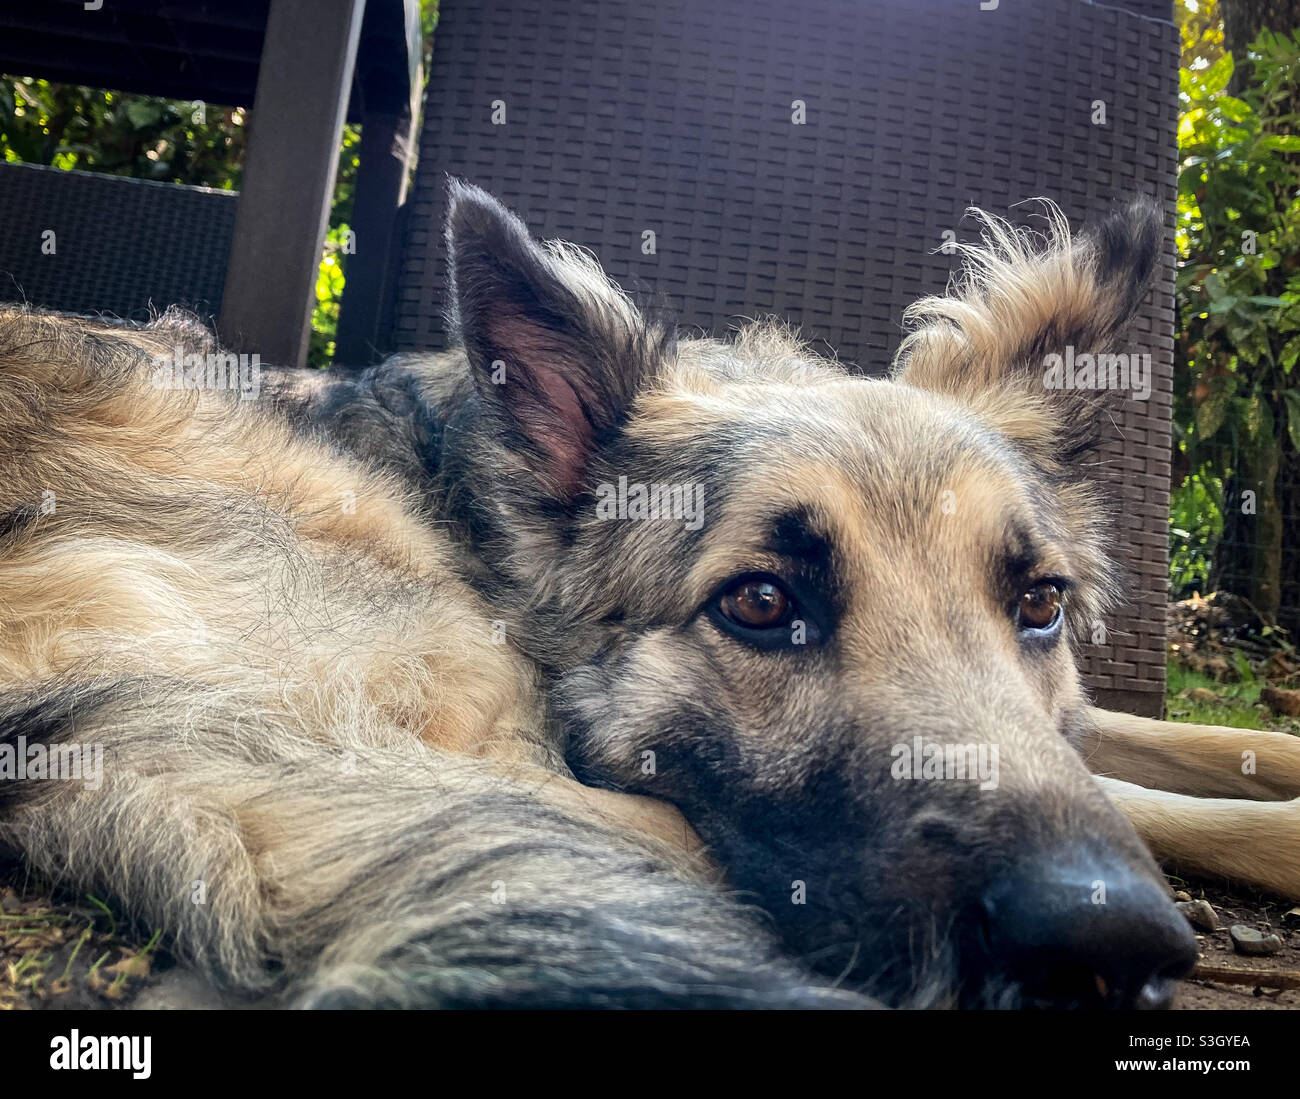 A dog resting in the garden Stock Photo